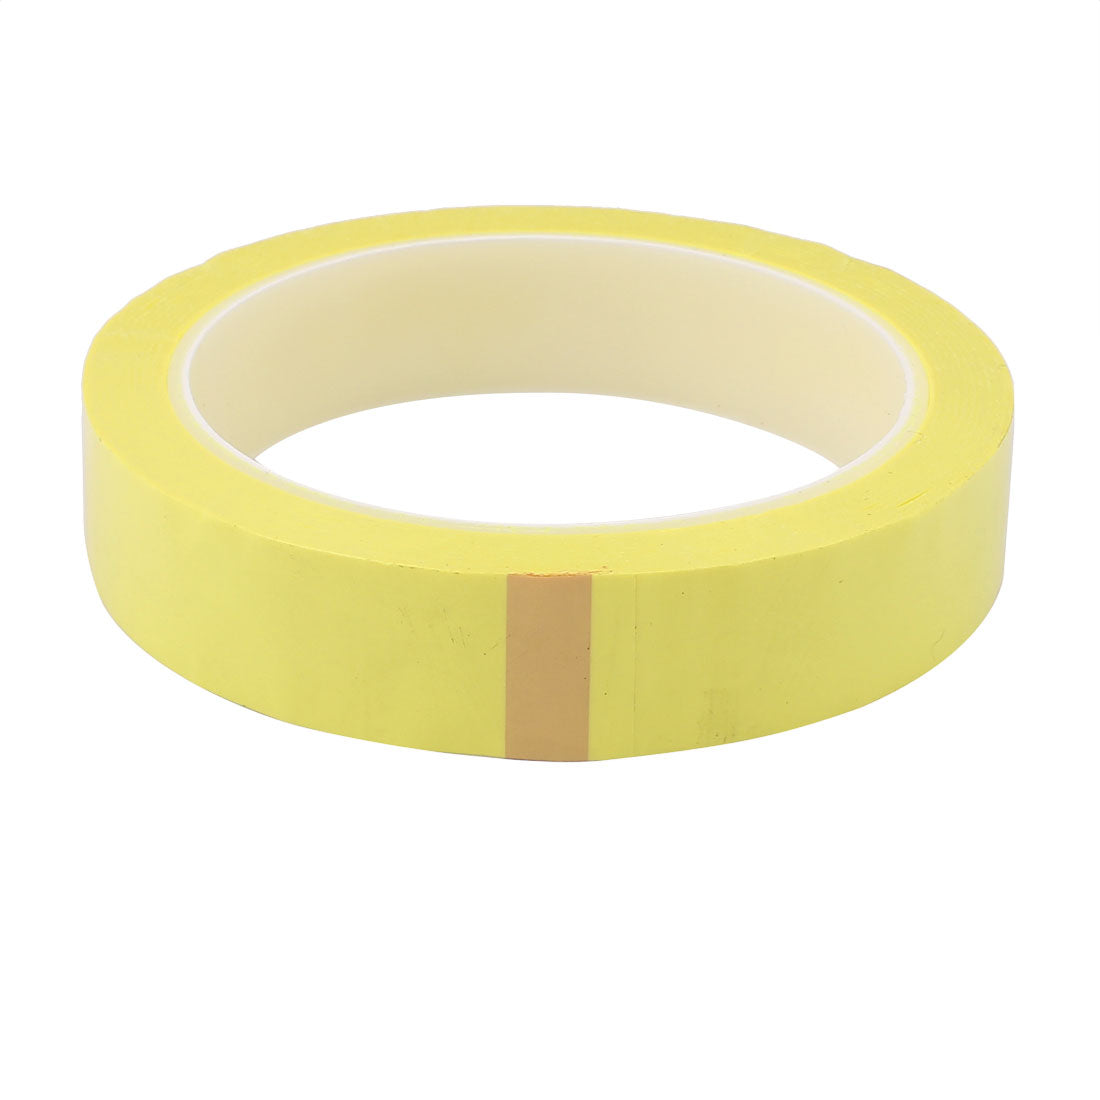 uxcell Uxcell 1Pcs 20mm Single Sided Strong Self Adhesive Mylar Tape 50M Length Yellow